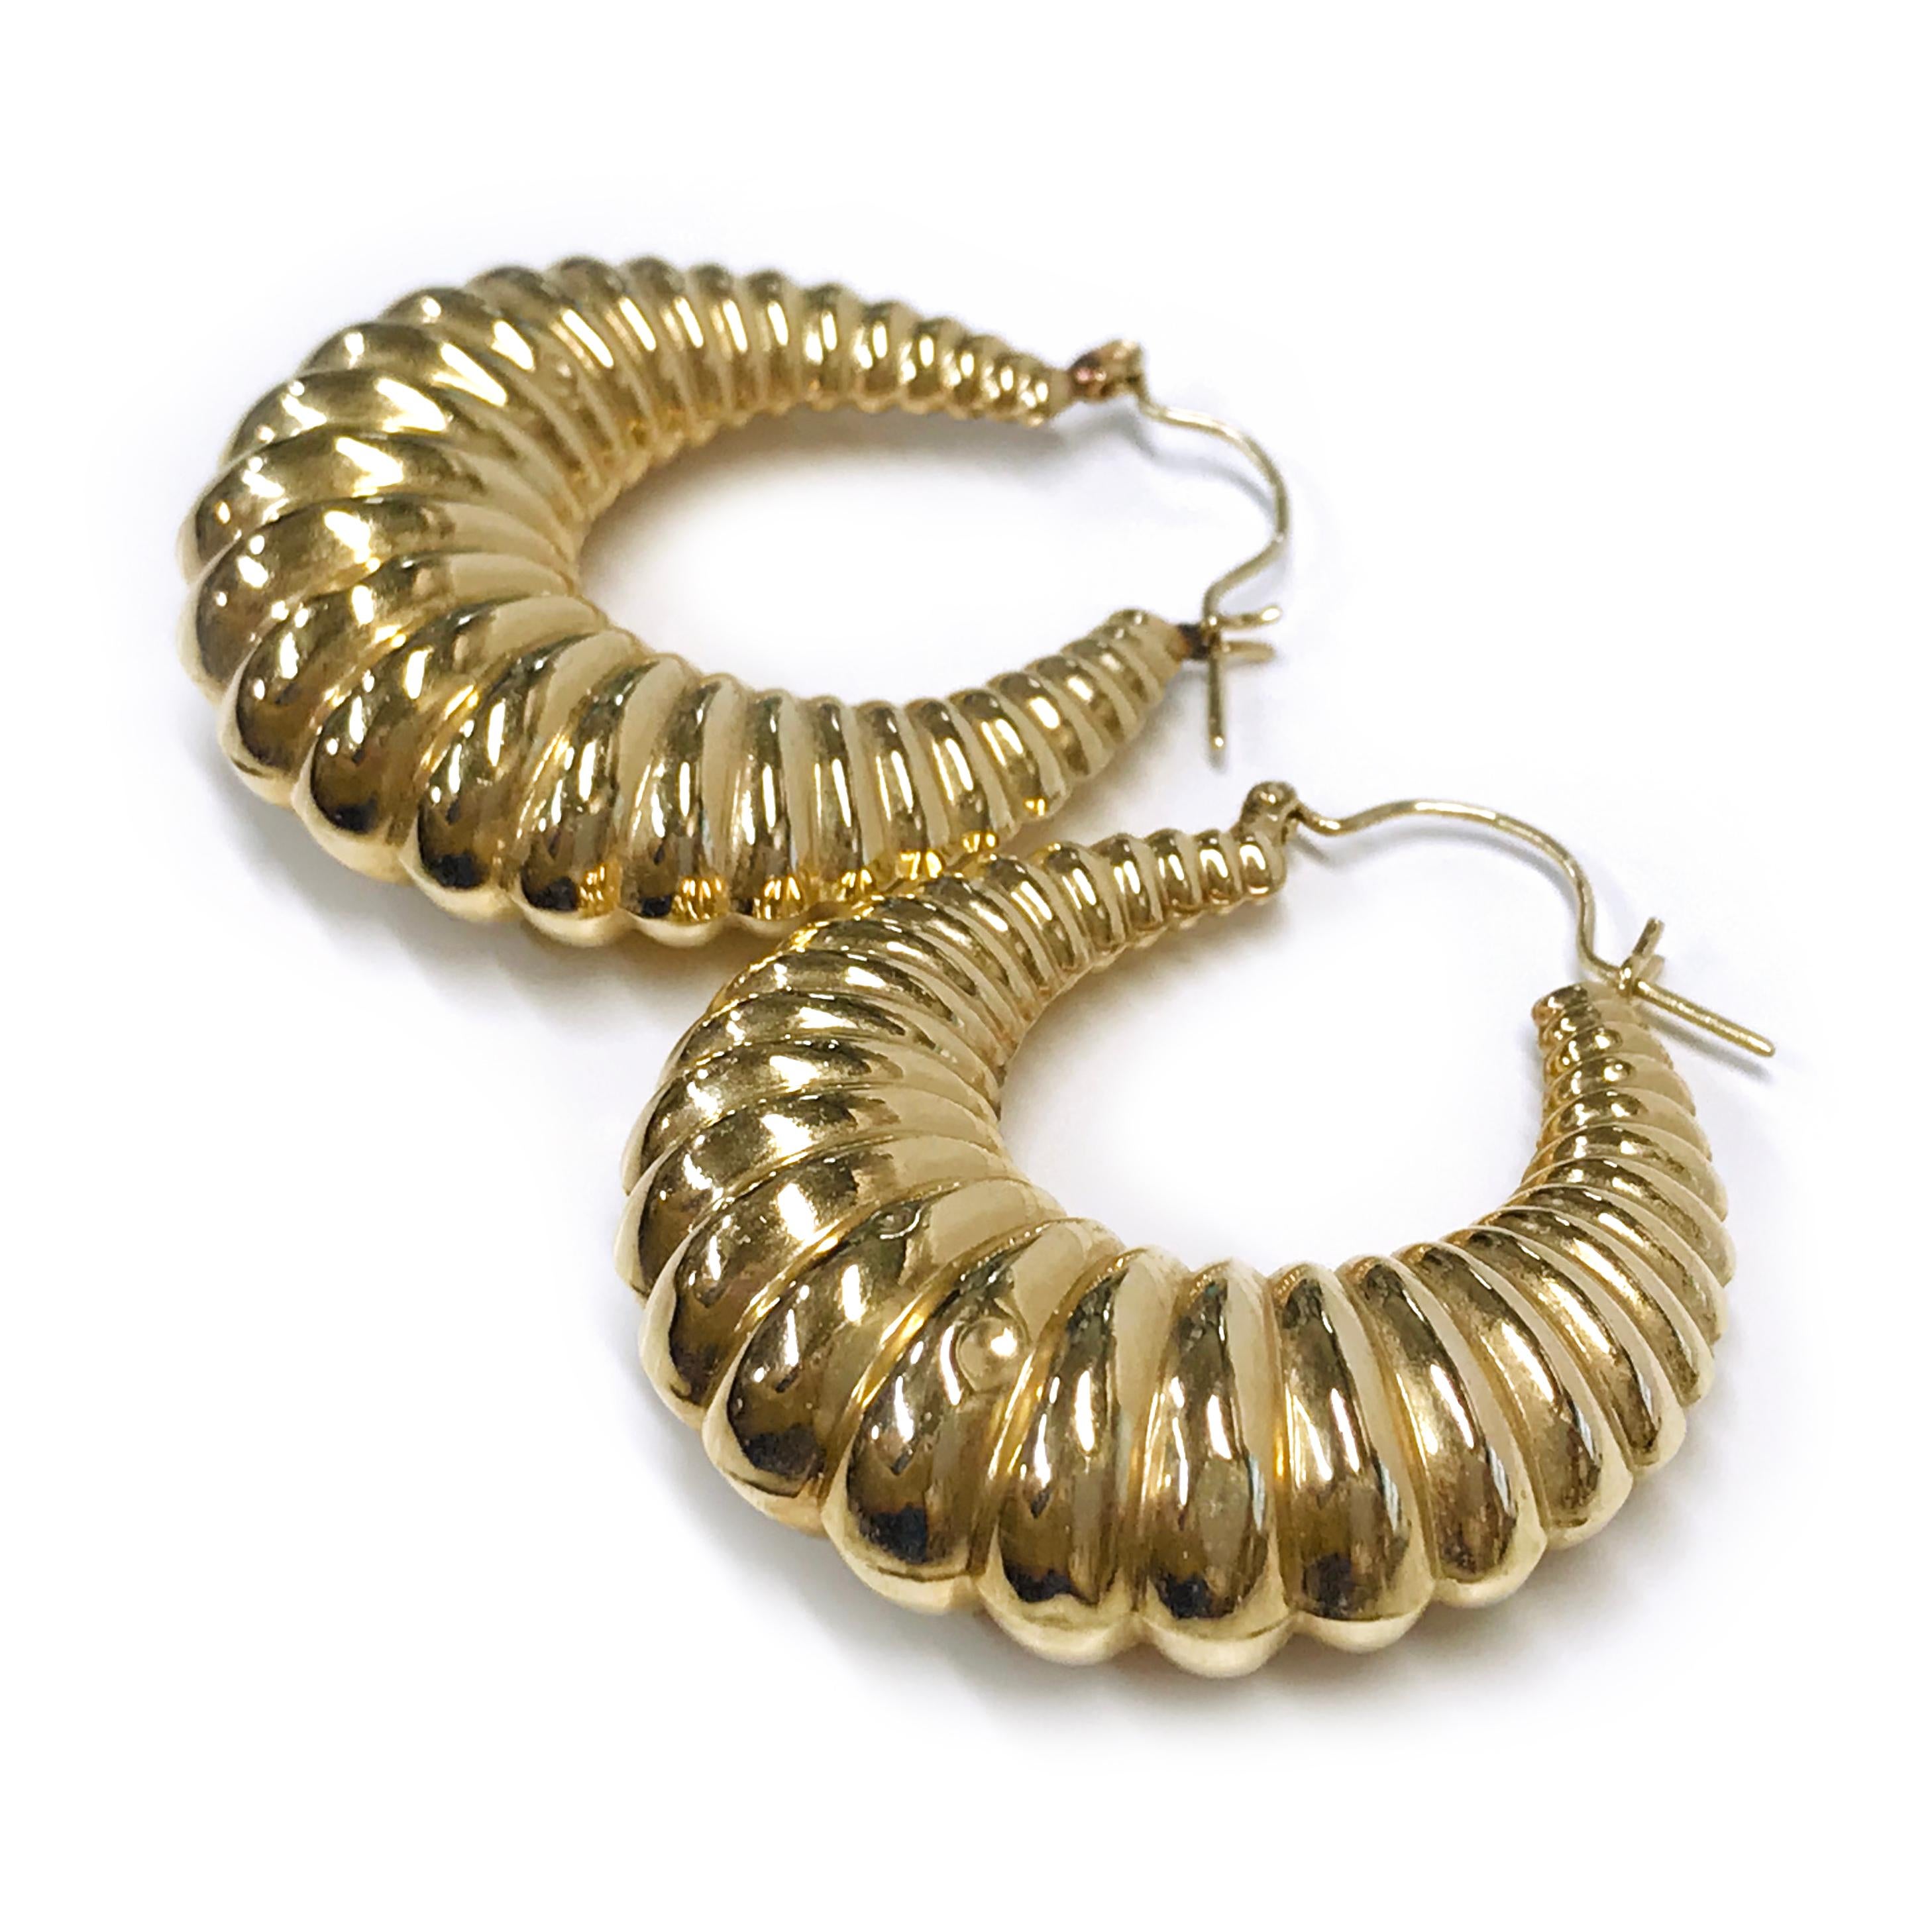 14 Karat Gold Hoop Doorknocker Earrings. These lightweight hollow shrimp hoops are the perfect accessory. Both earrings have small dents at the lower part of the earrings, see photos. The earrings have a hoop wire closure. The total gold weight of